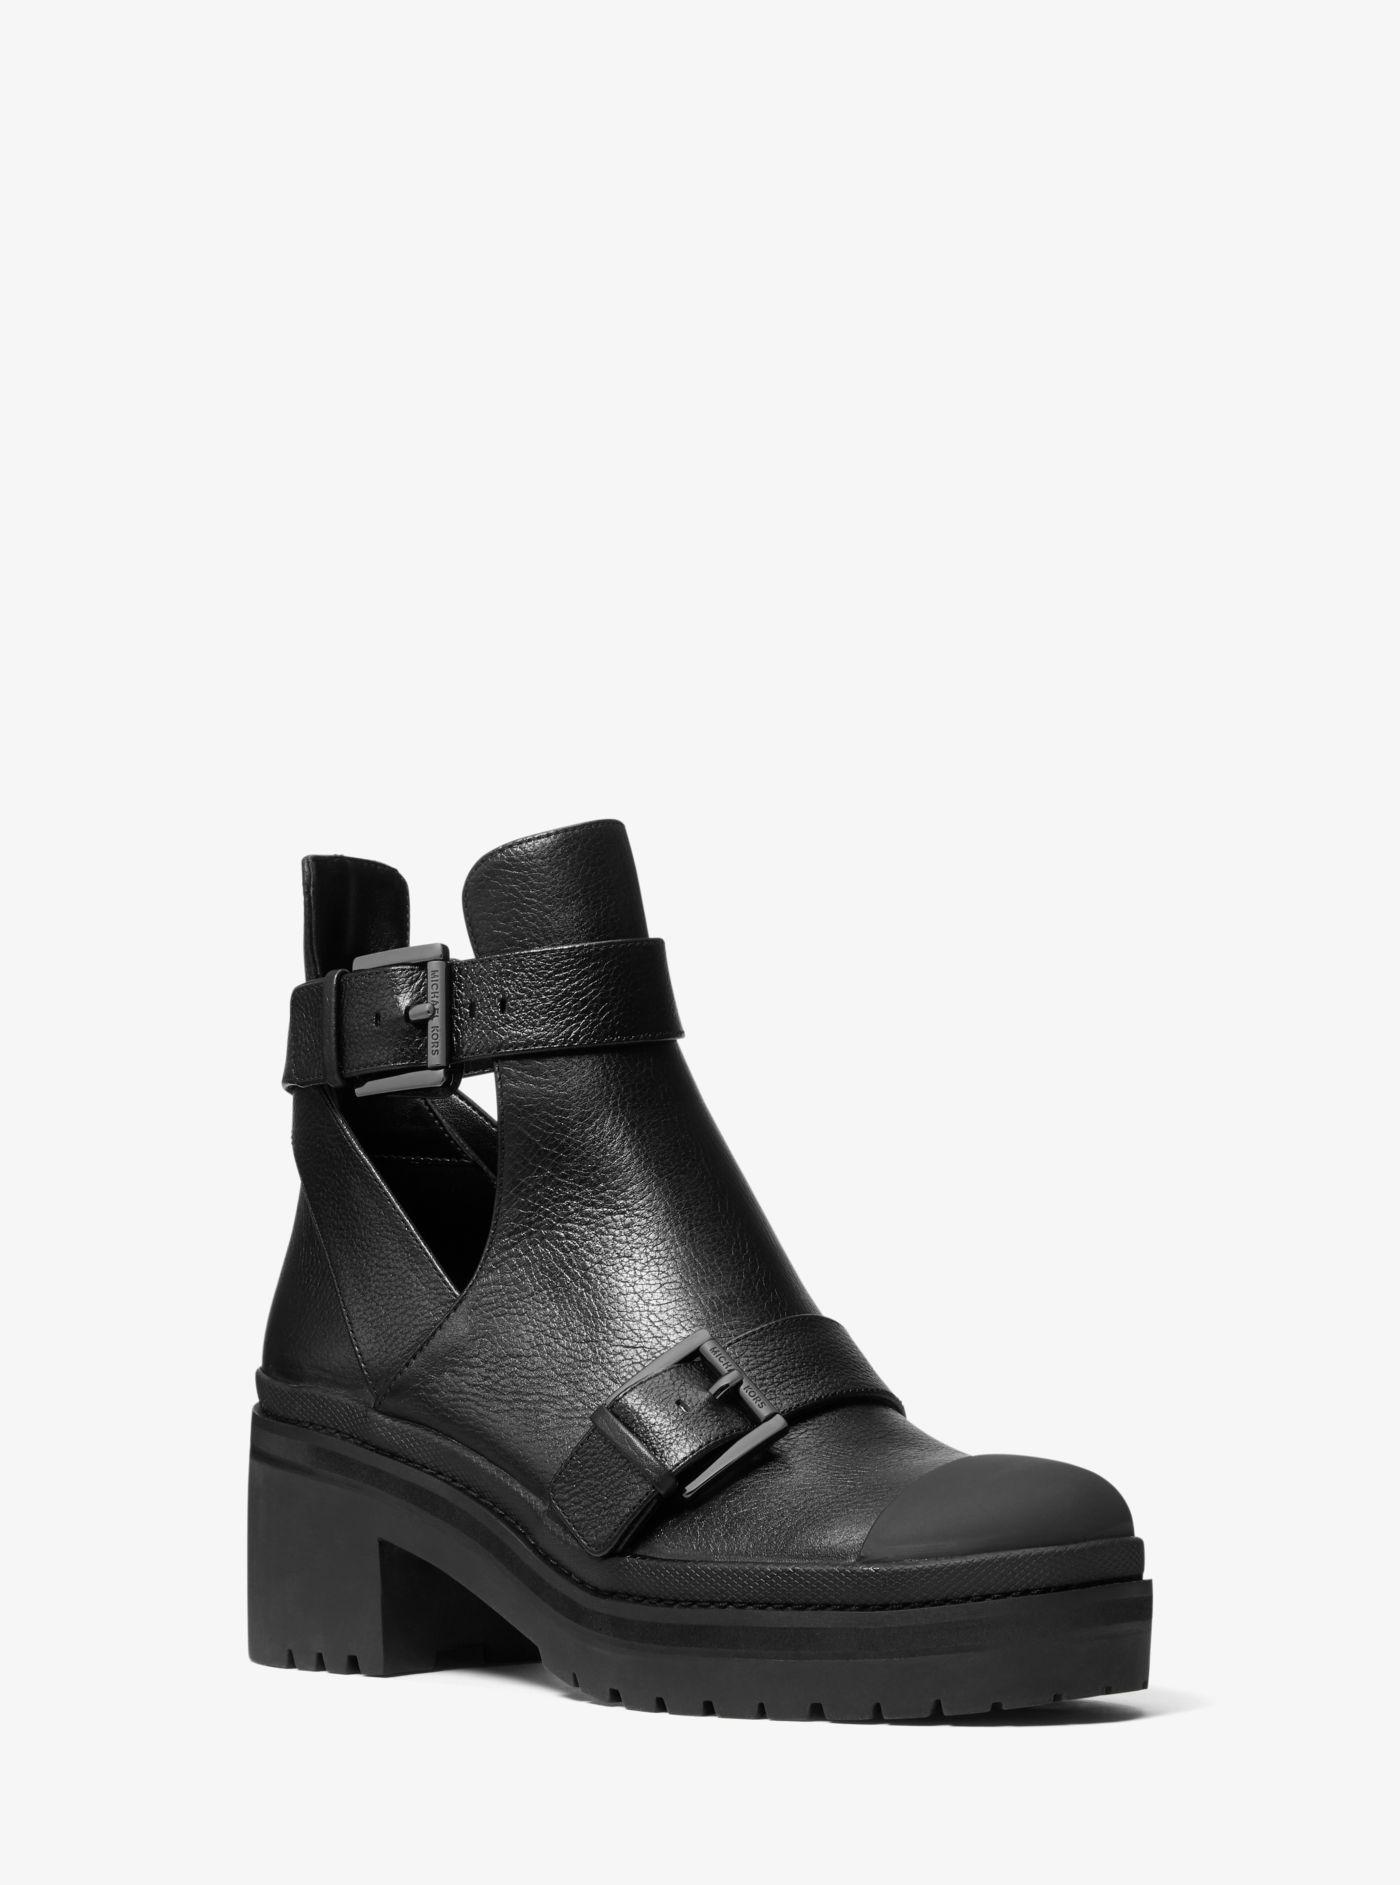 Michael Kors Corey Leather Cutout Ankle Boot in Black | Lyst